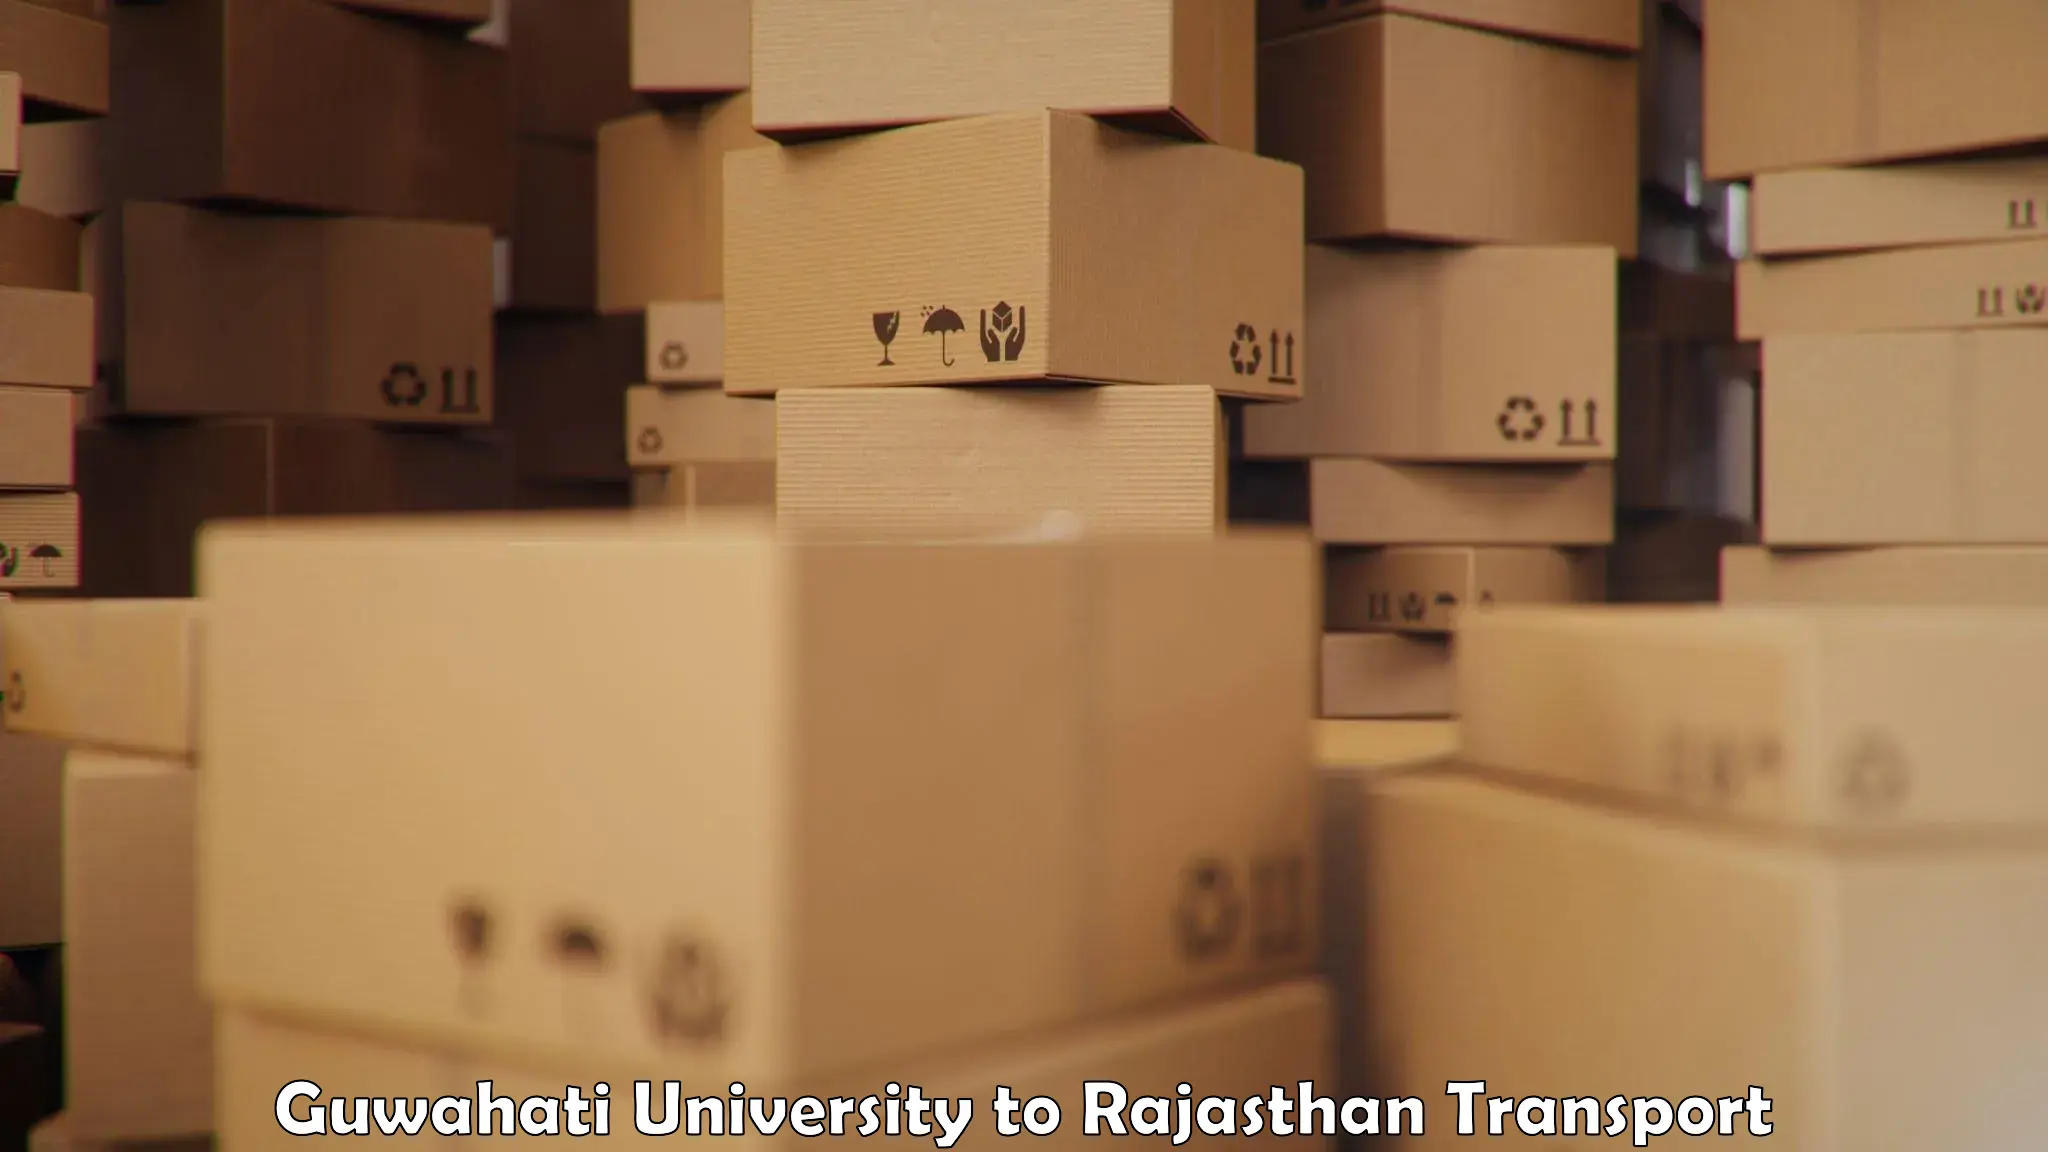 Shipping services Guwahati University to Lalsot